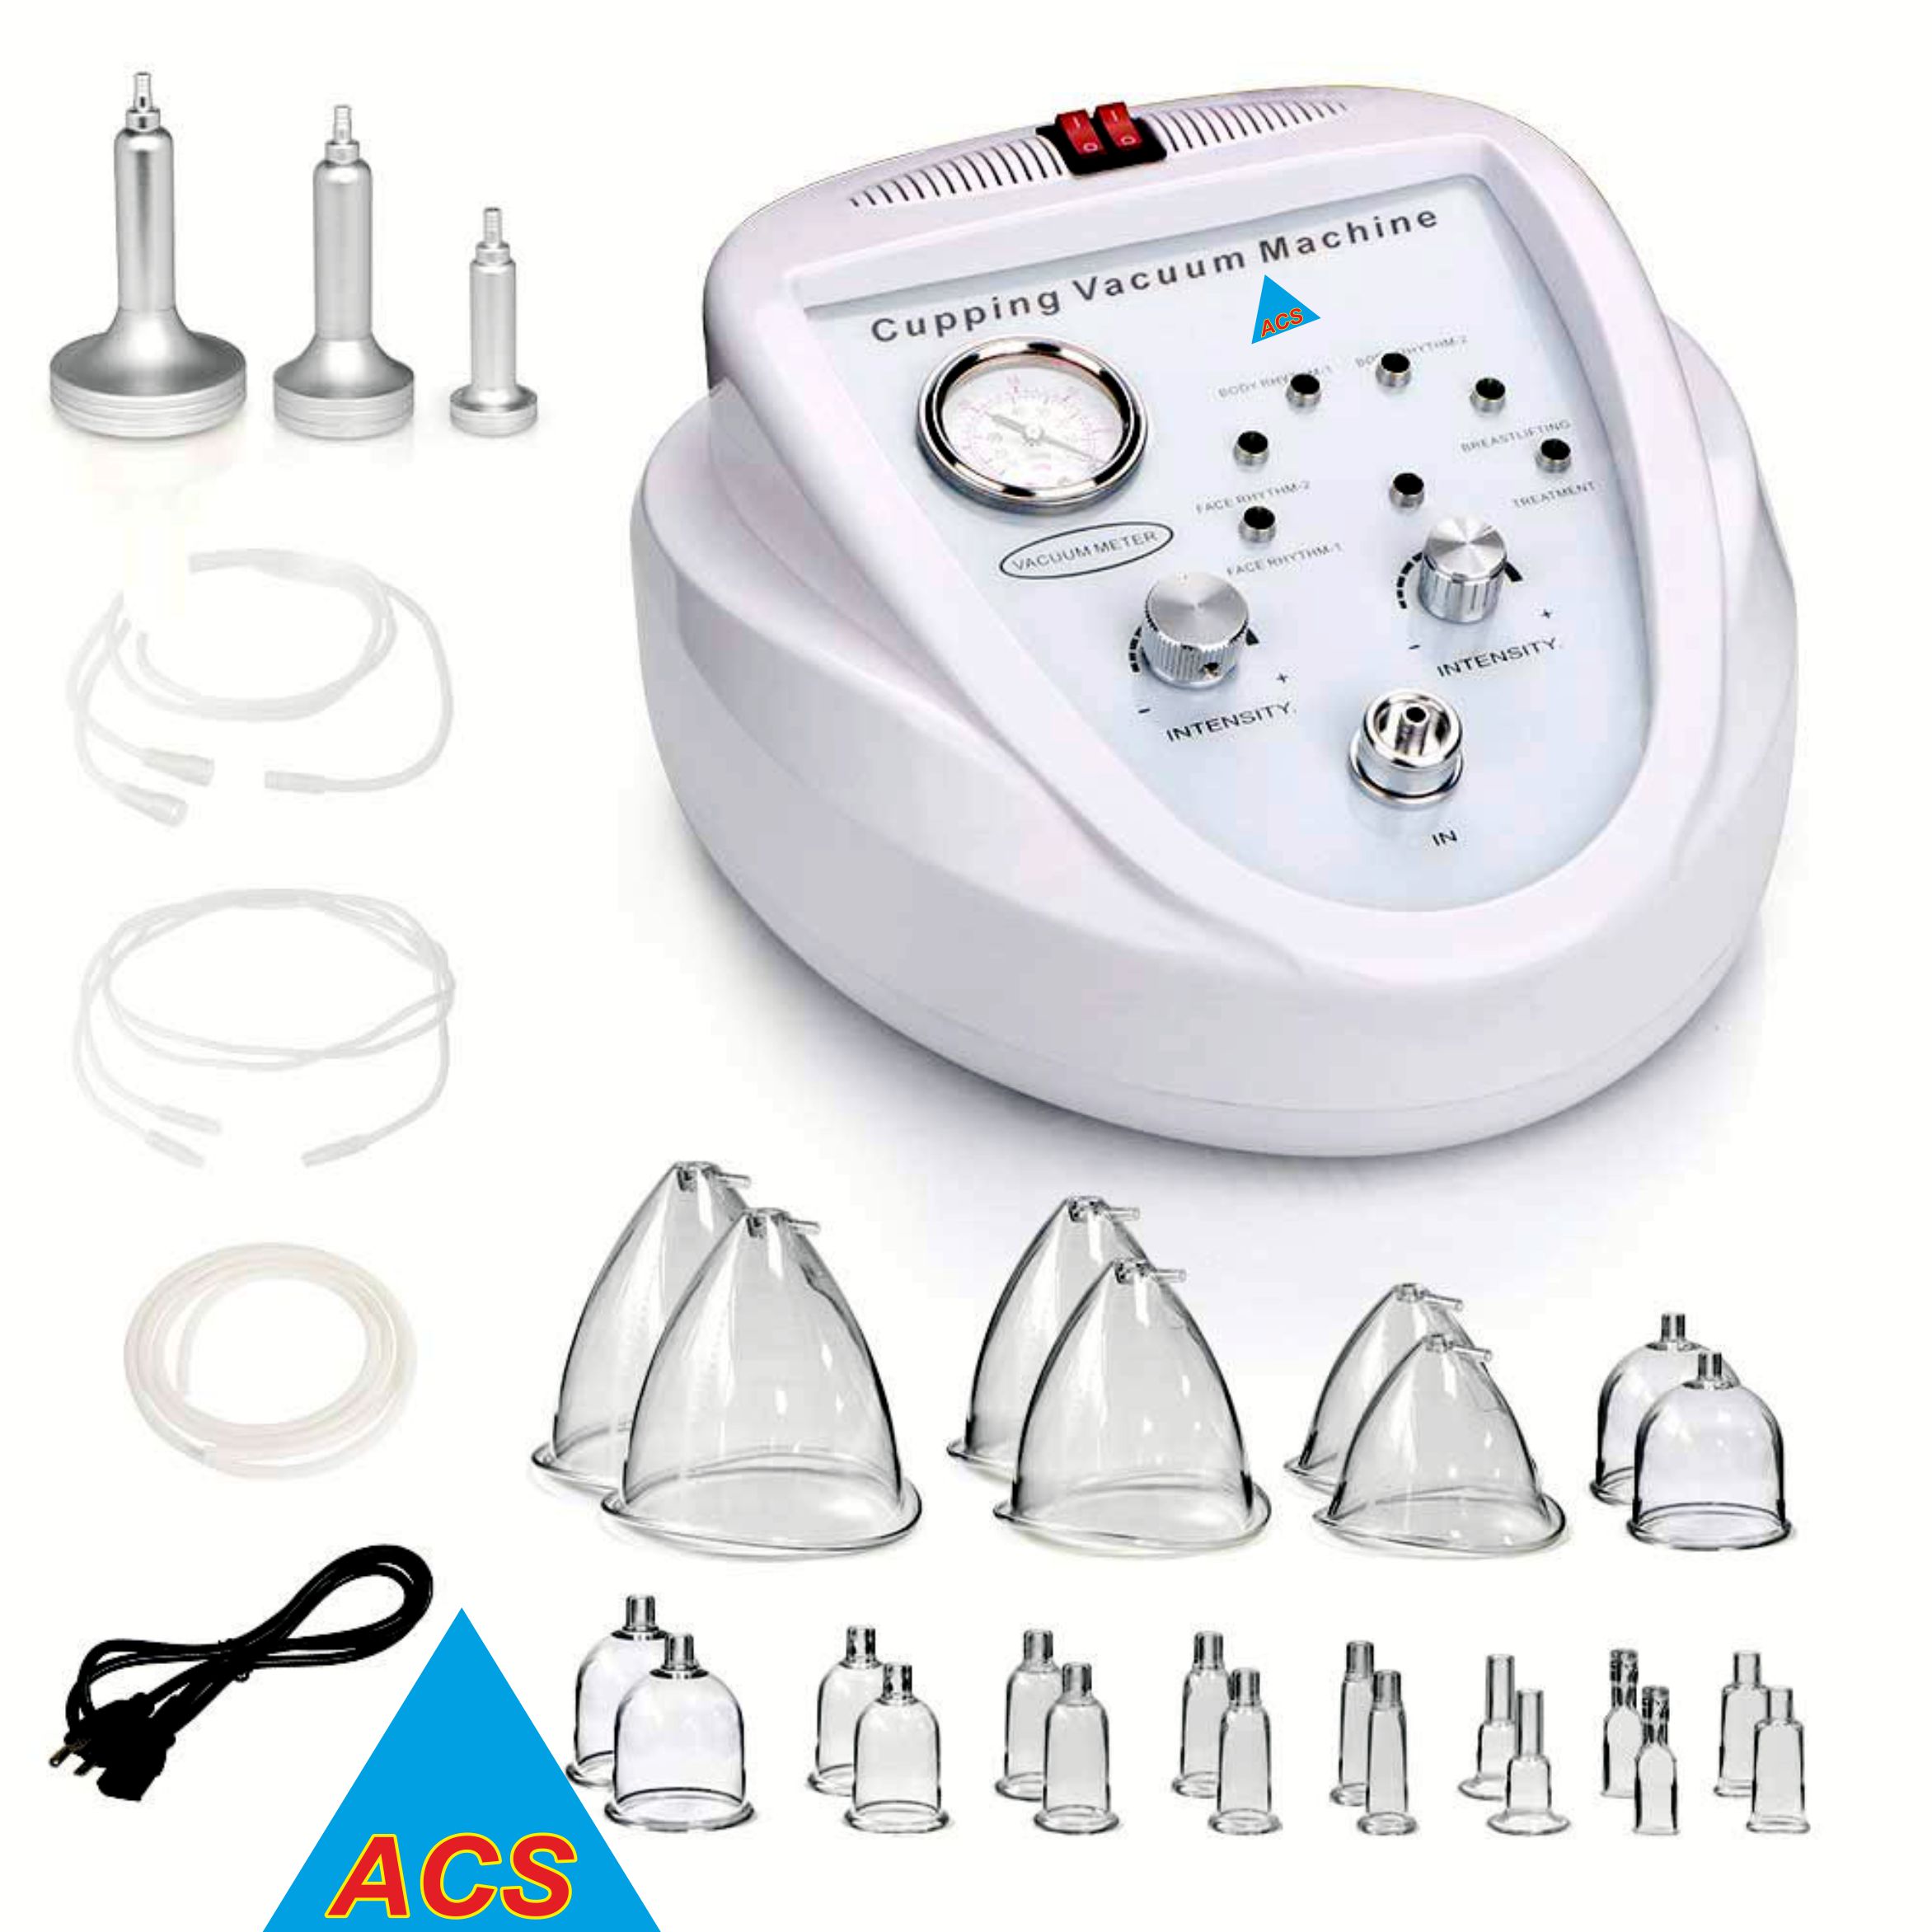 ACS Vaccum Cupping Therapy Machine 